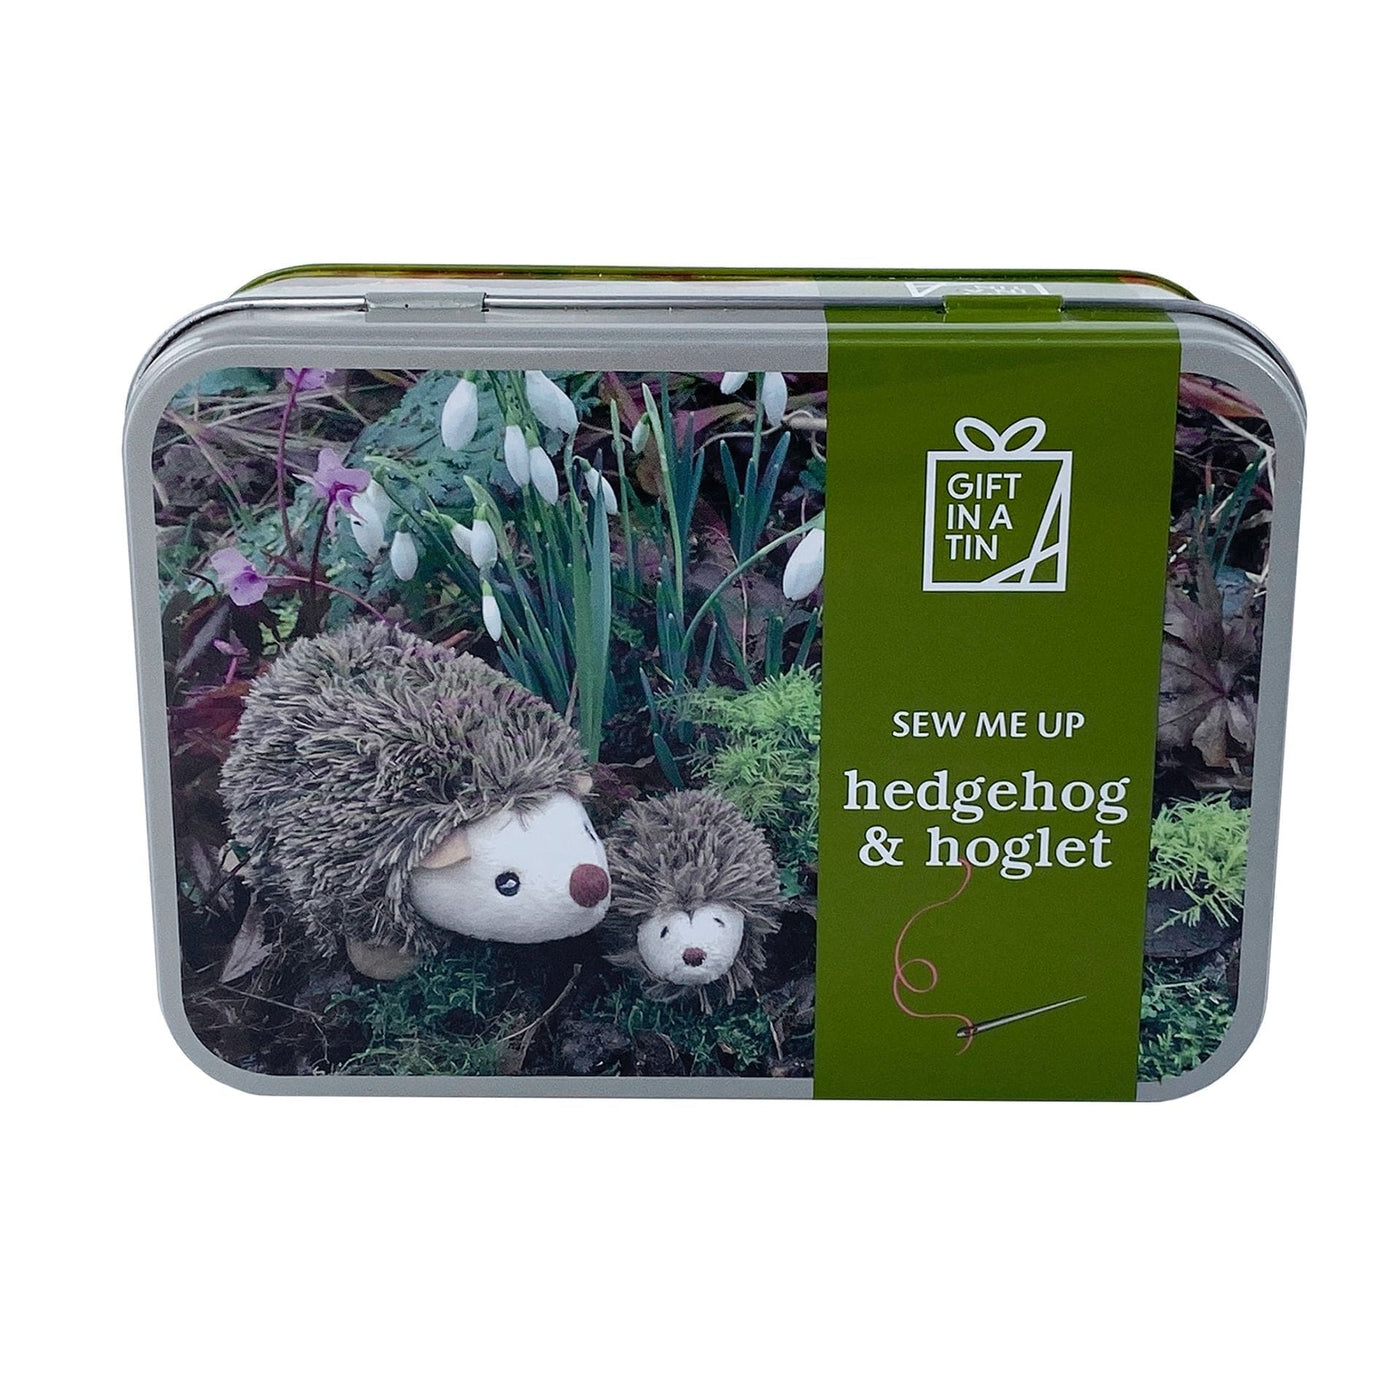 Widdop Gifts Novelty Gifts Hedgehog and Hoglet Simple Sewing Kit